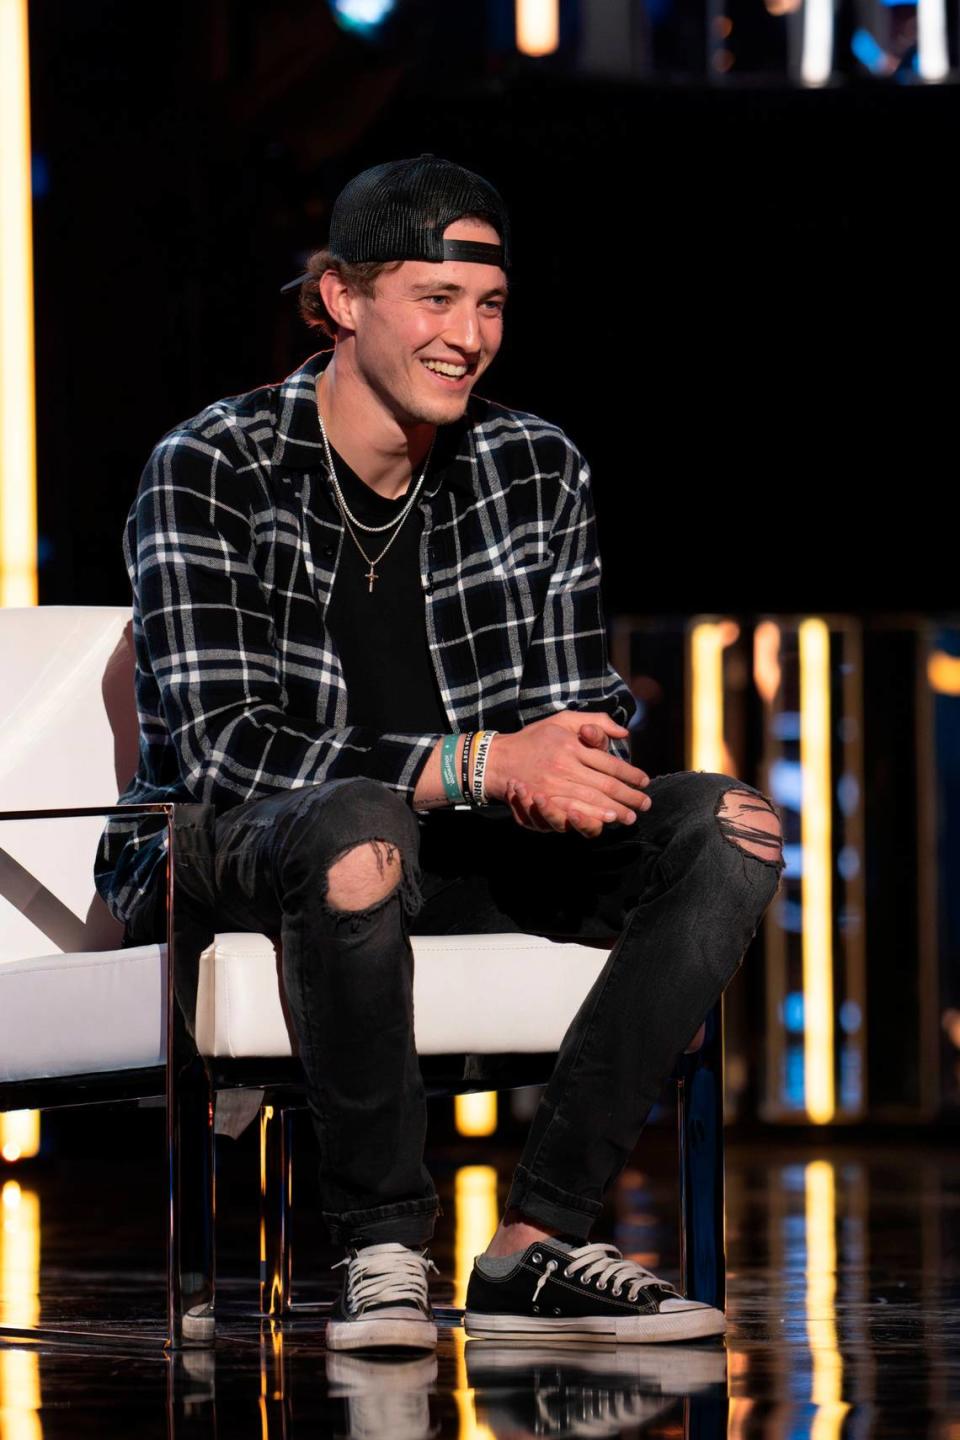 Blake sits in front of the judges to hear their decision.